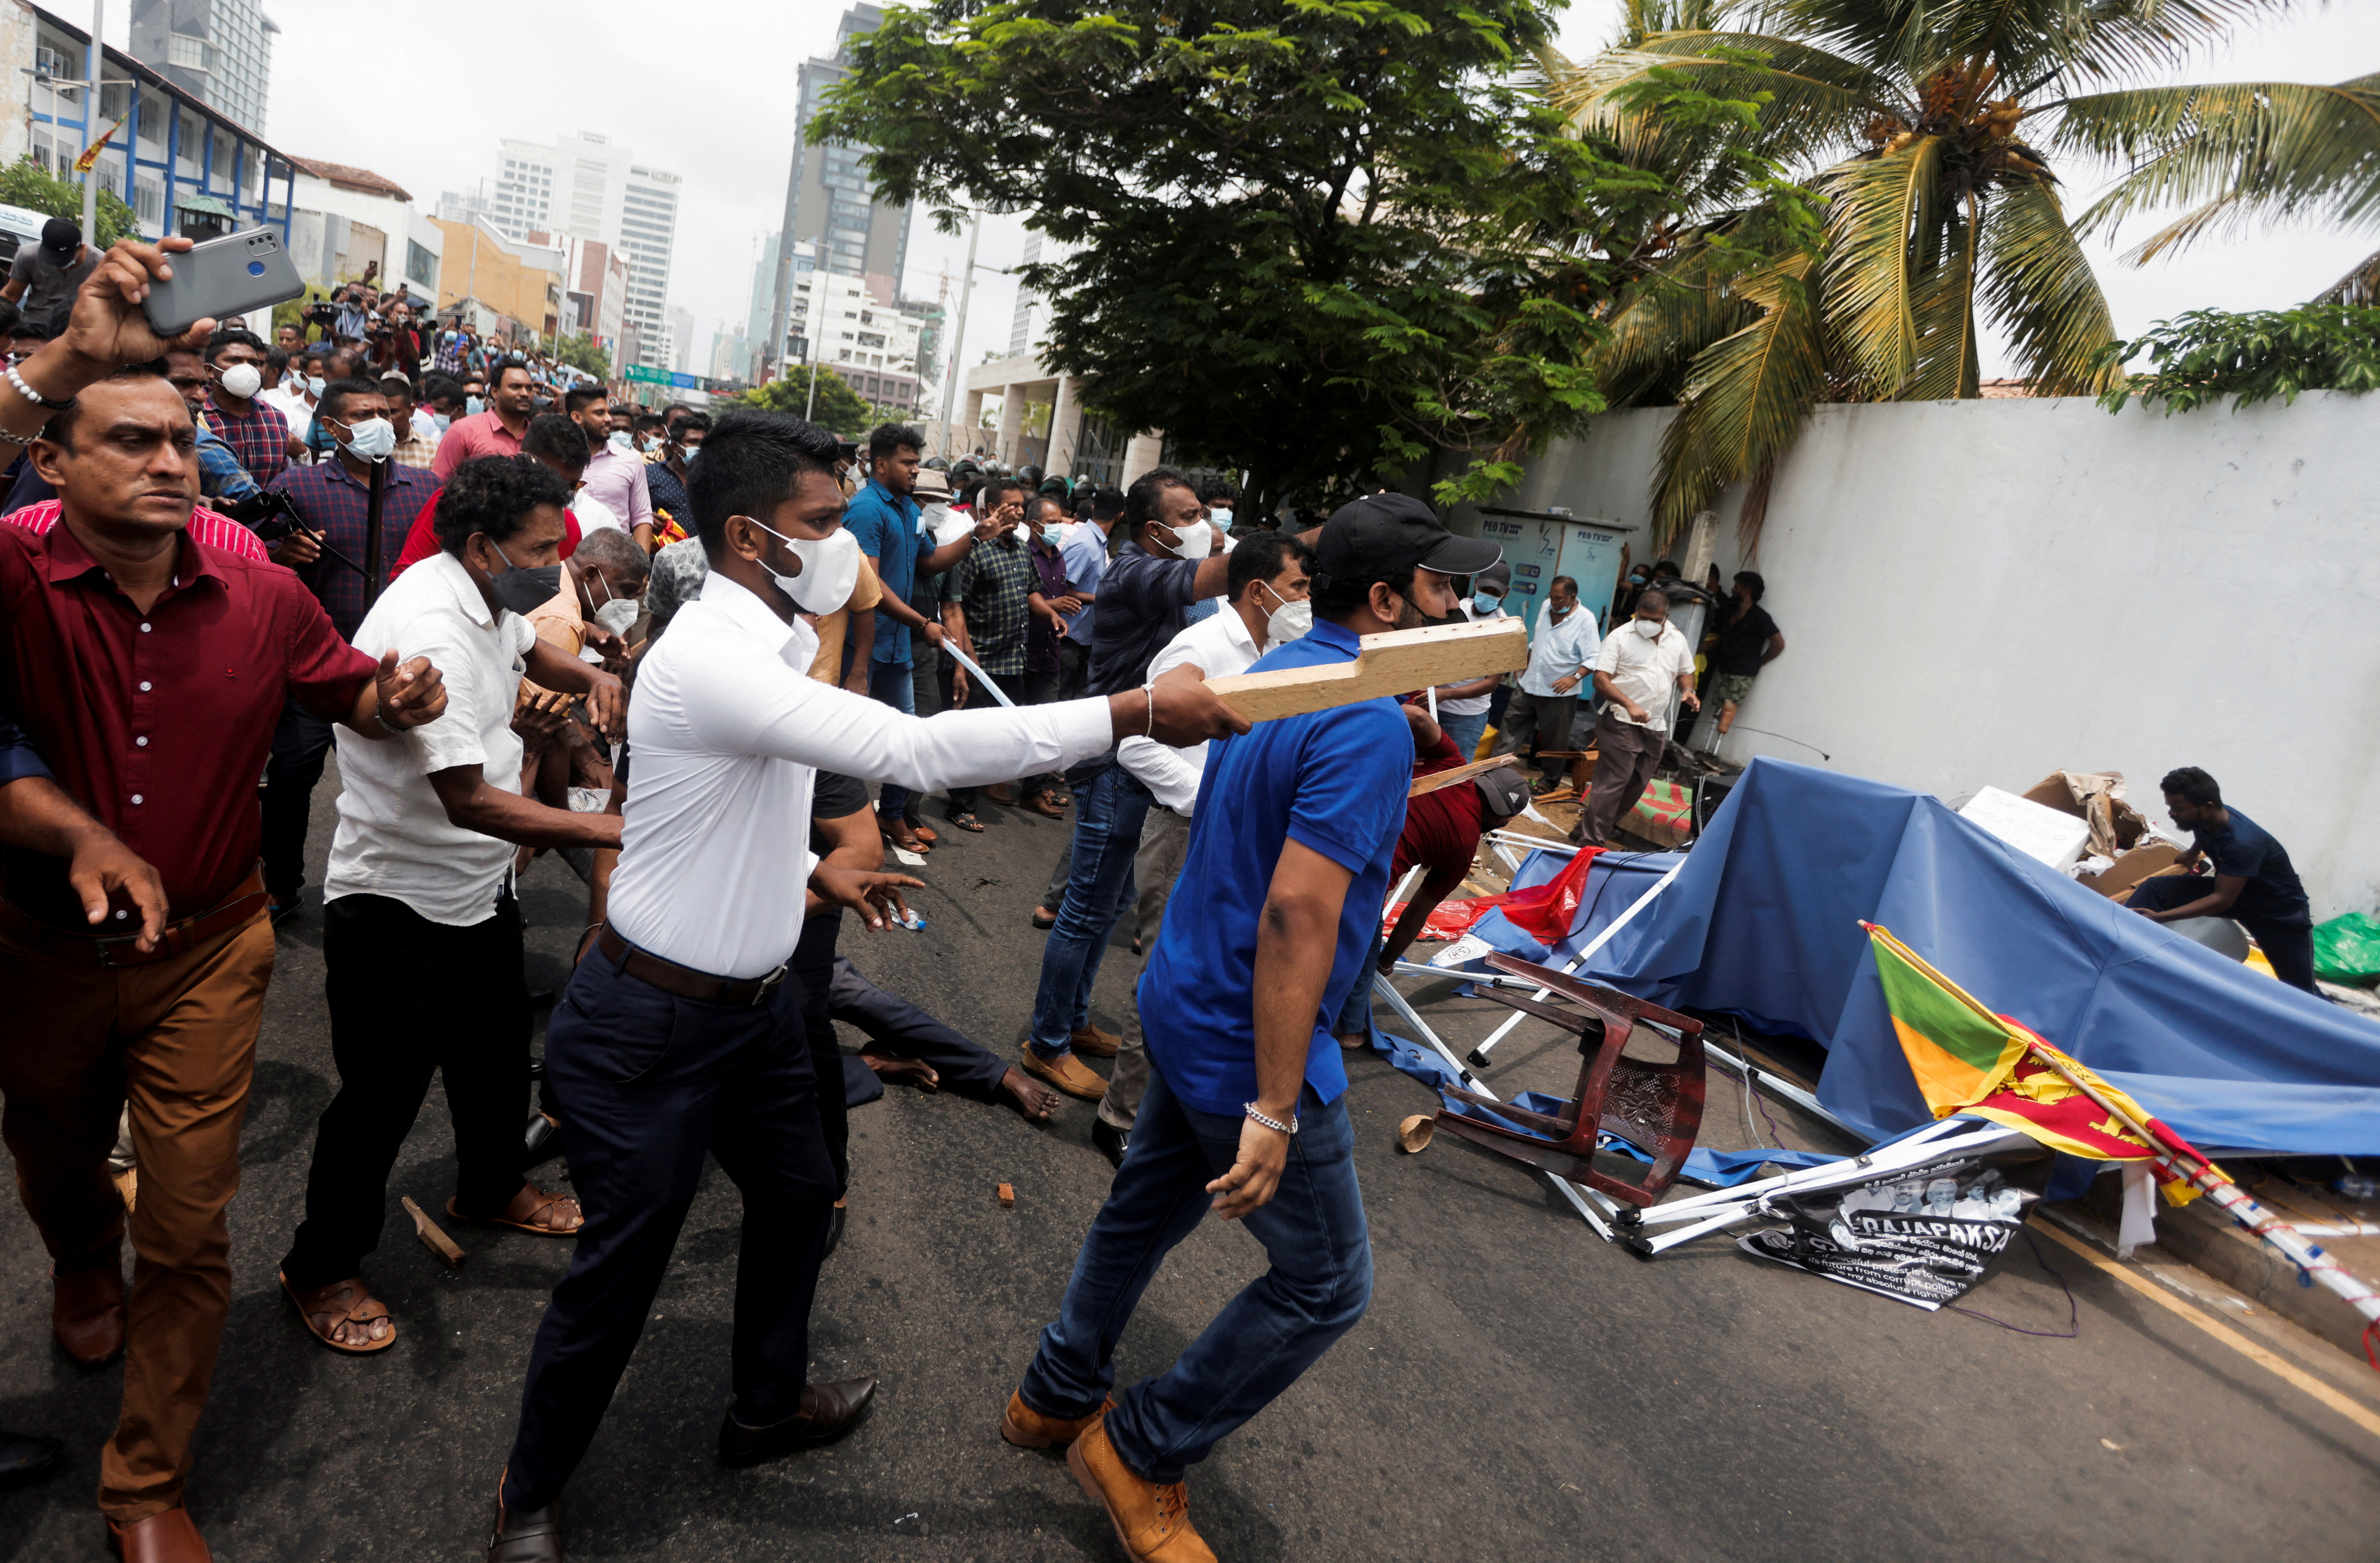 Sri Lanka's ruling party supporters storm anti-government protest camp, at least 9 injured, in Colombo